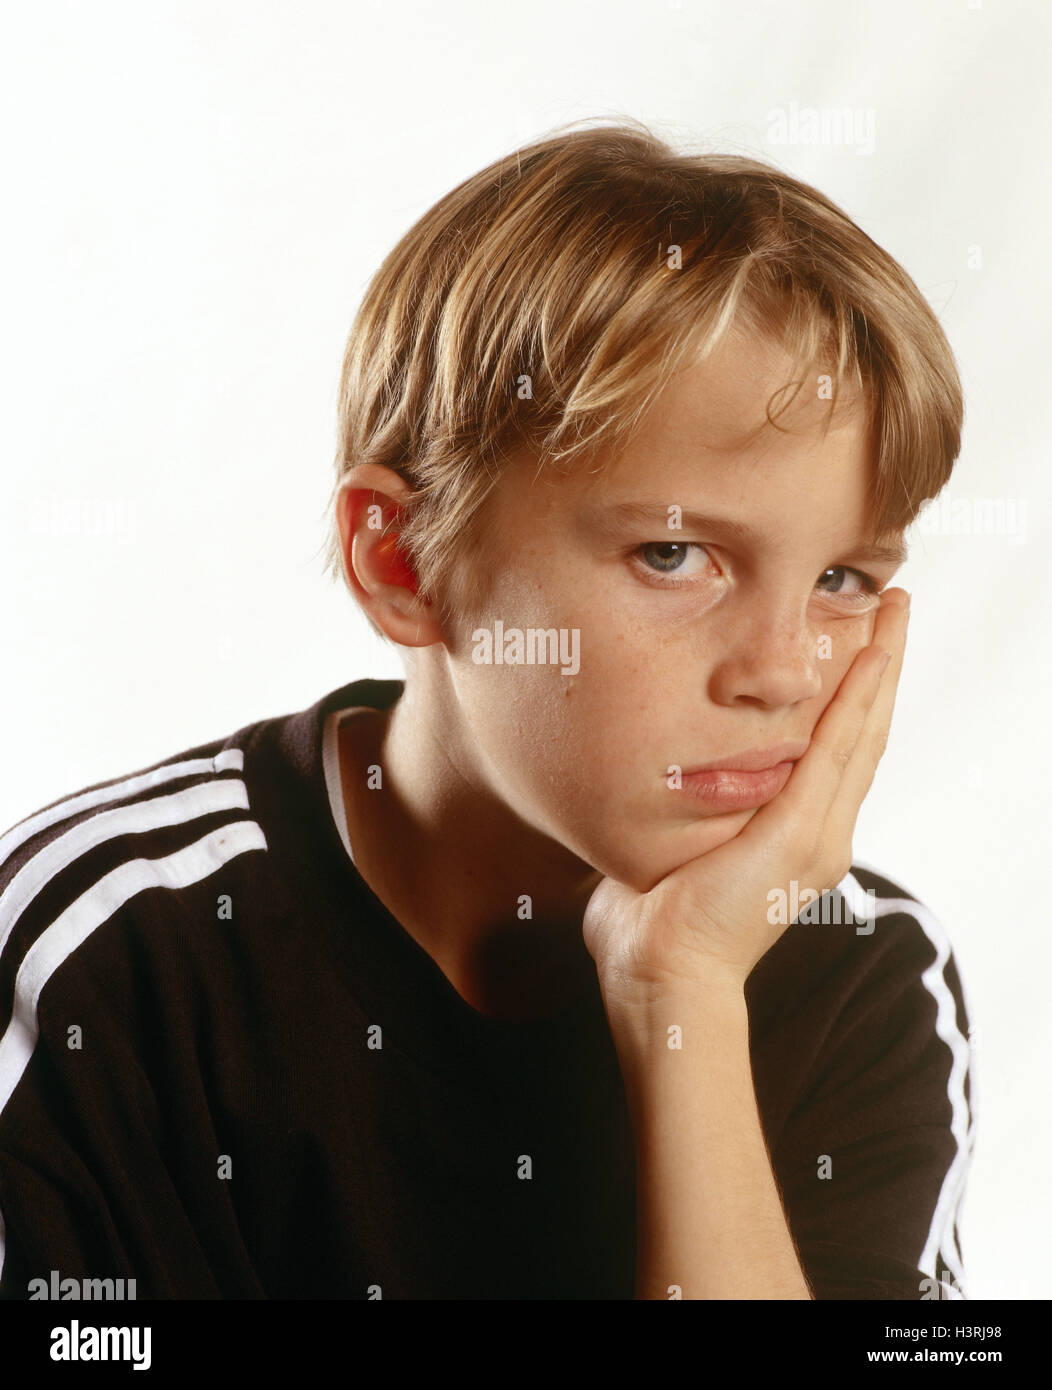 Boy, blond, facial play, boredom, portrait, add support child portrait, child, head, sulk boringly, sadly, offends, defiantly, dissatisfied, view camera, studio, inside Stock Photo